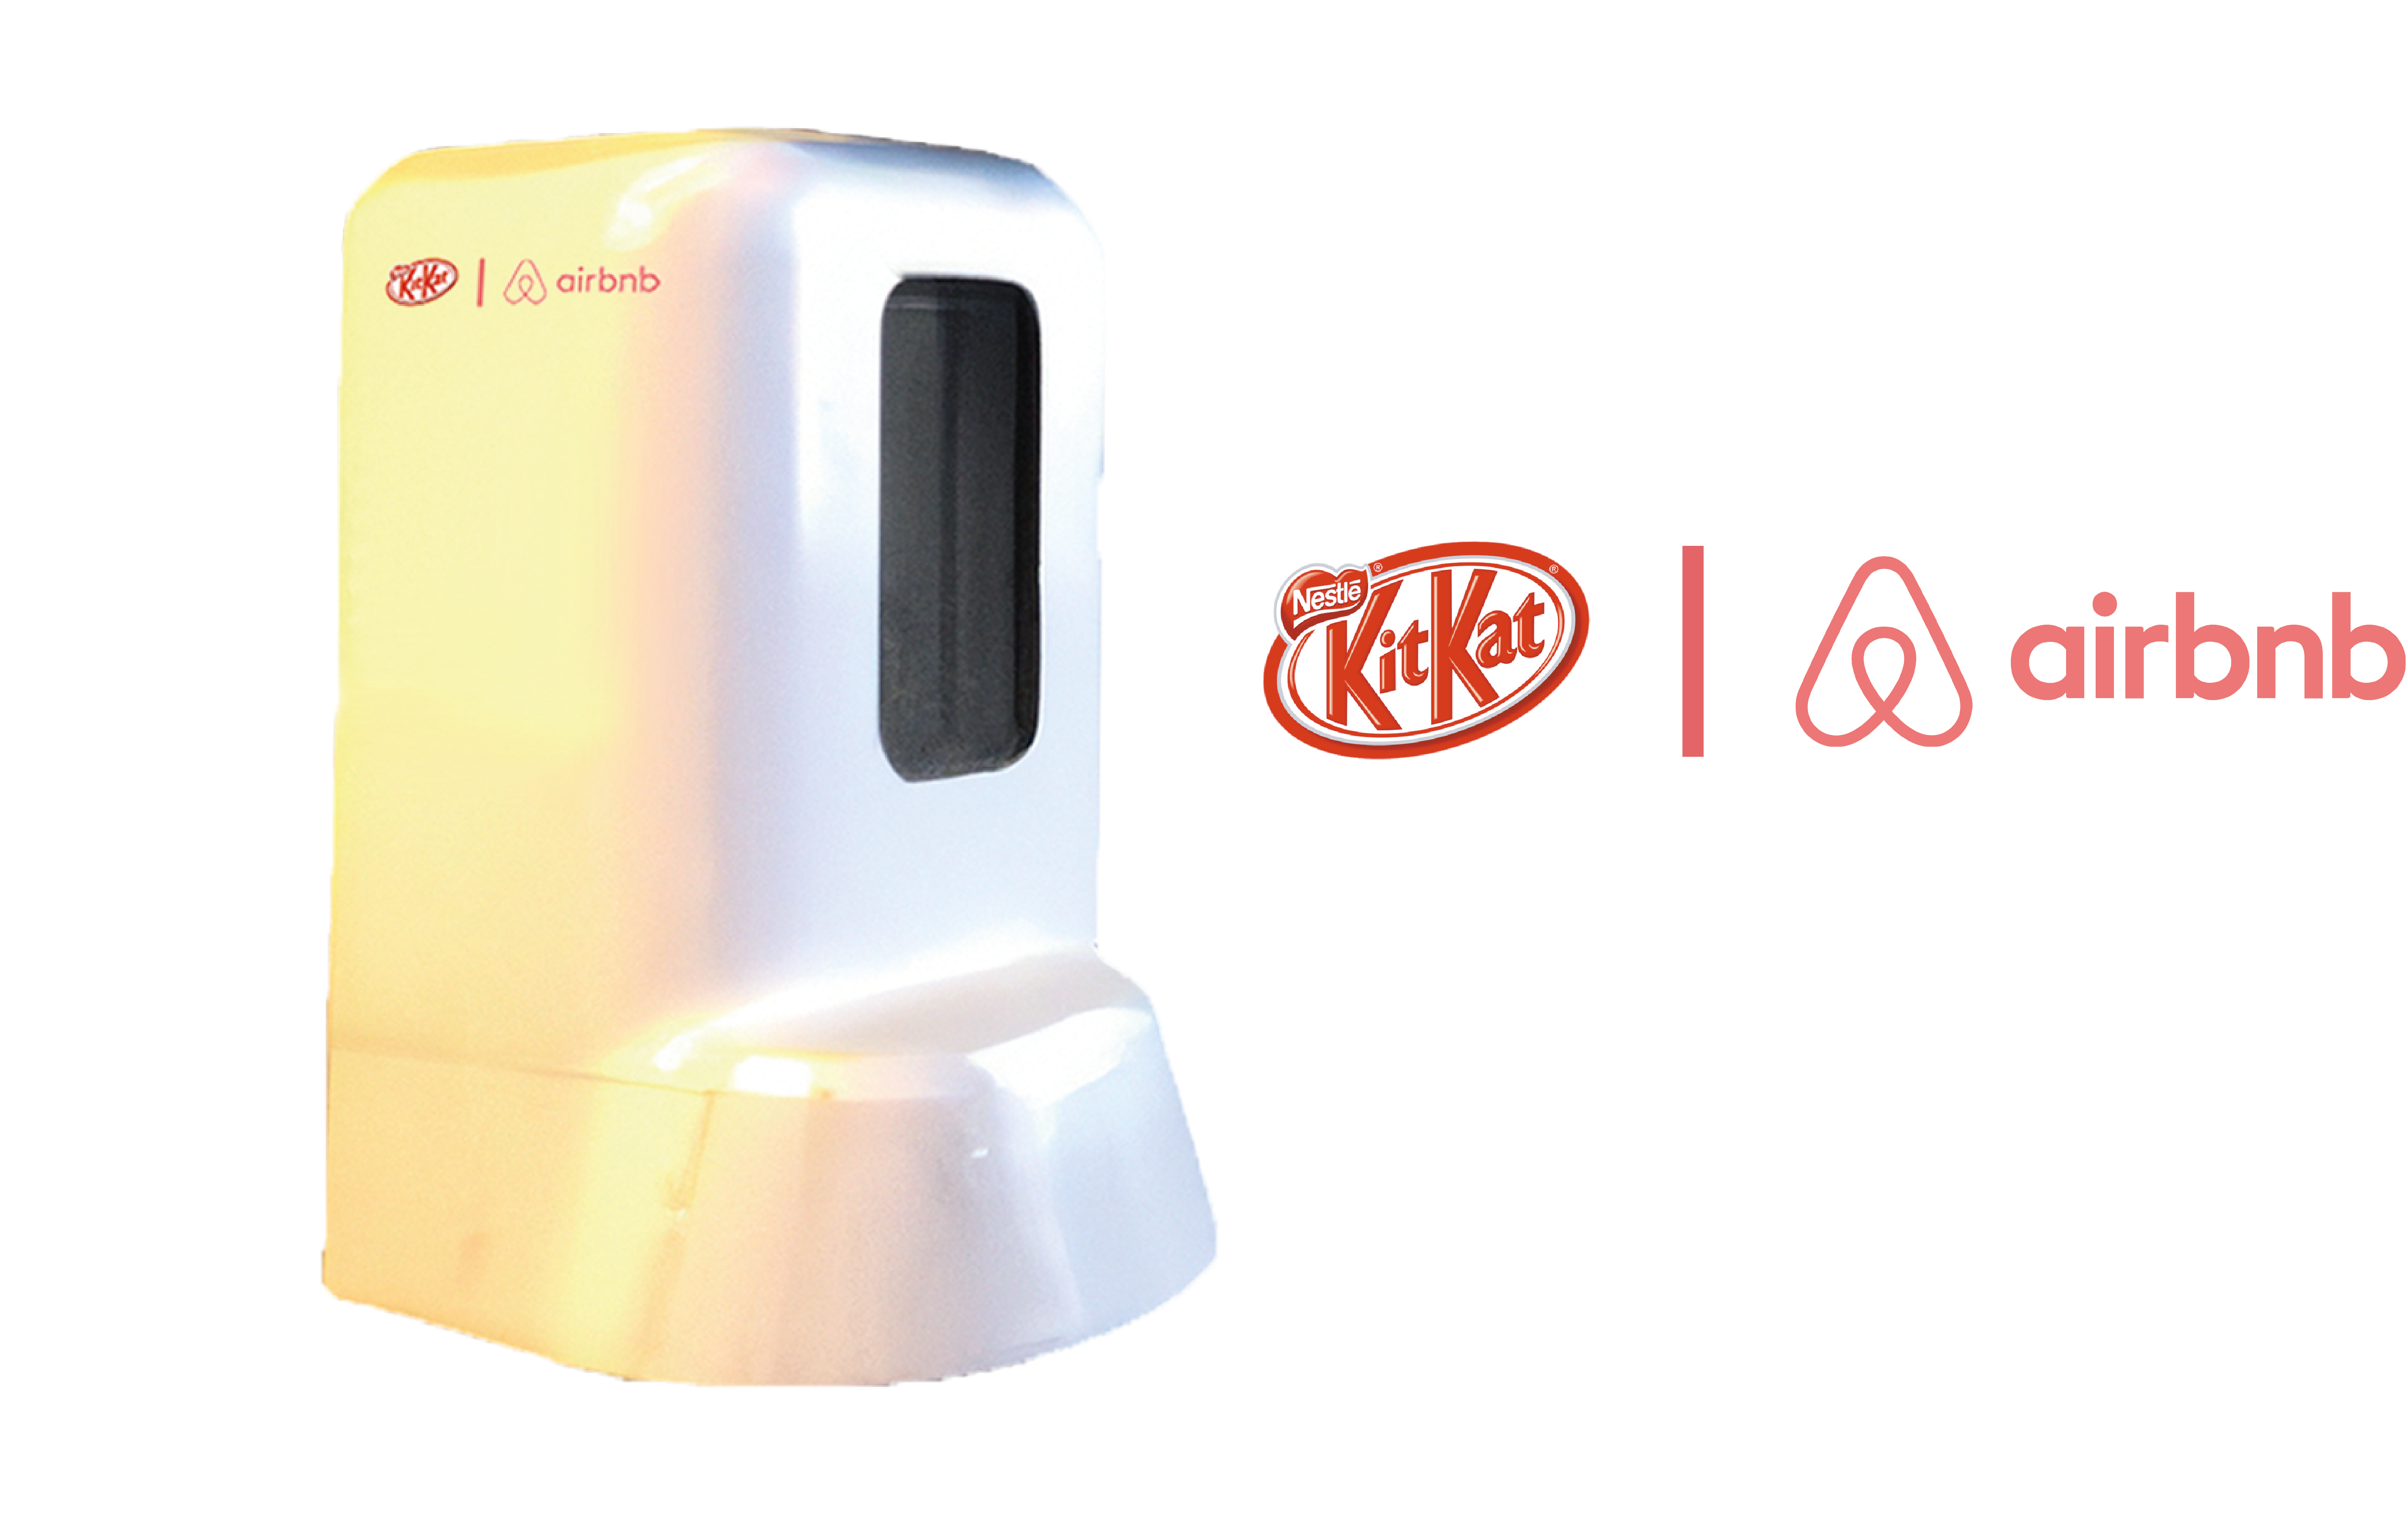 Thumbnail shows kitnap rest pod to the right with logos of kitkat and airbnb in red to the right.